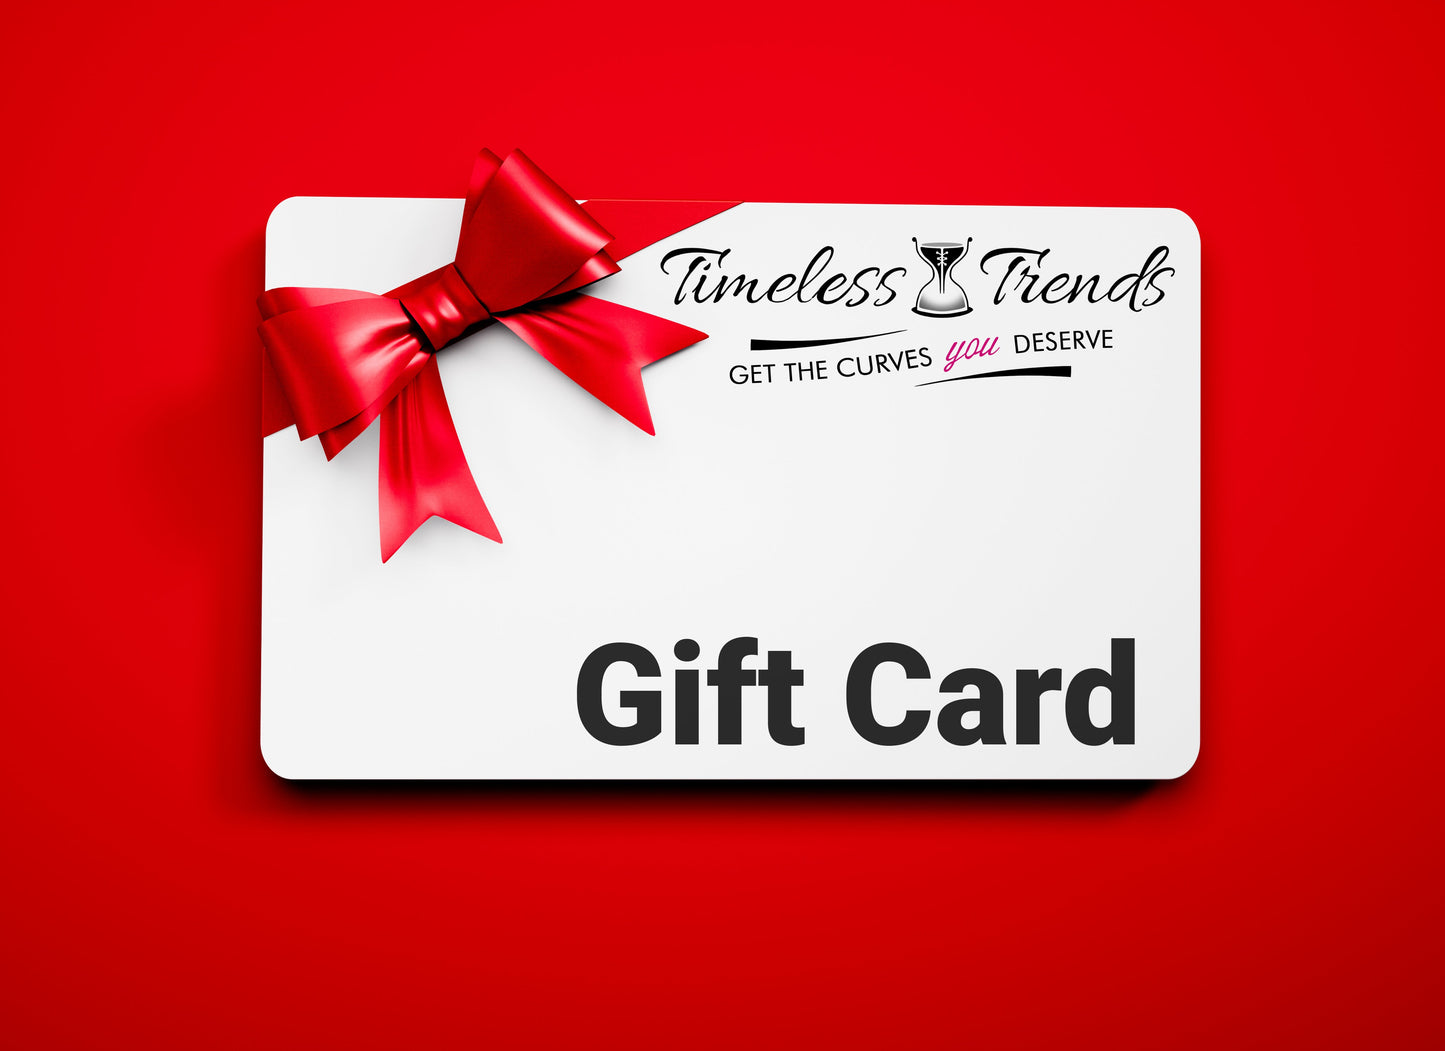 Timeless Trends $20.00 Gift Card